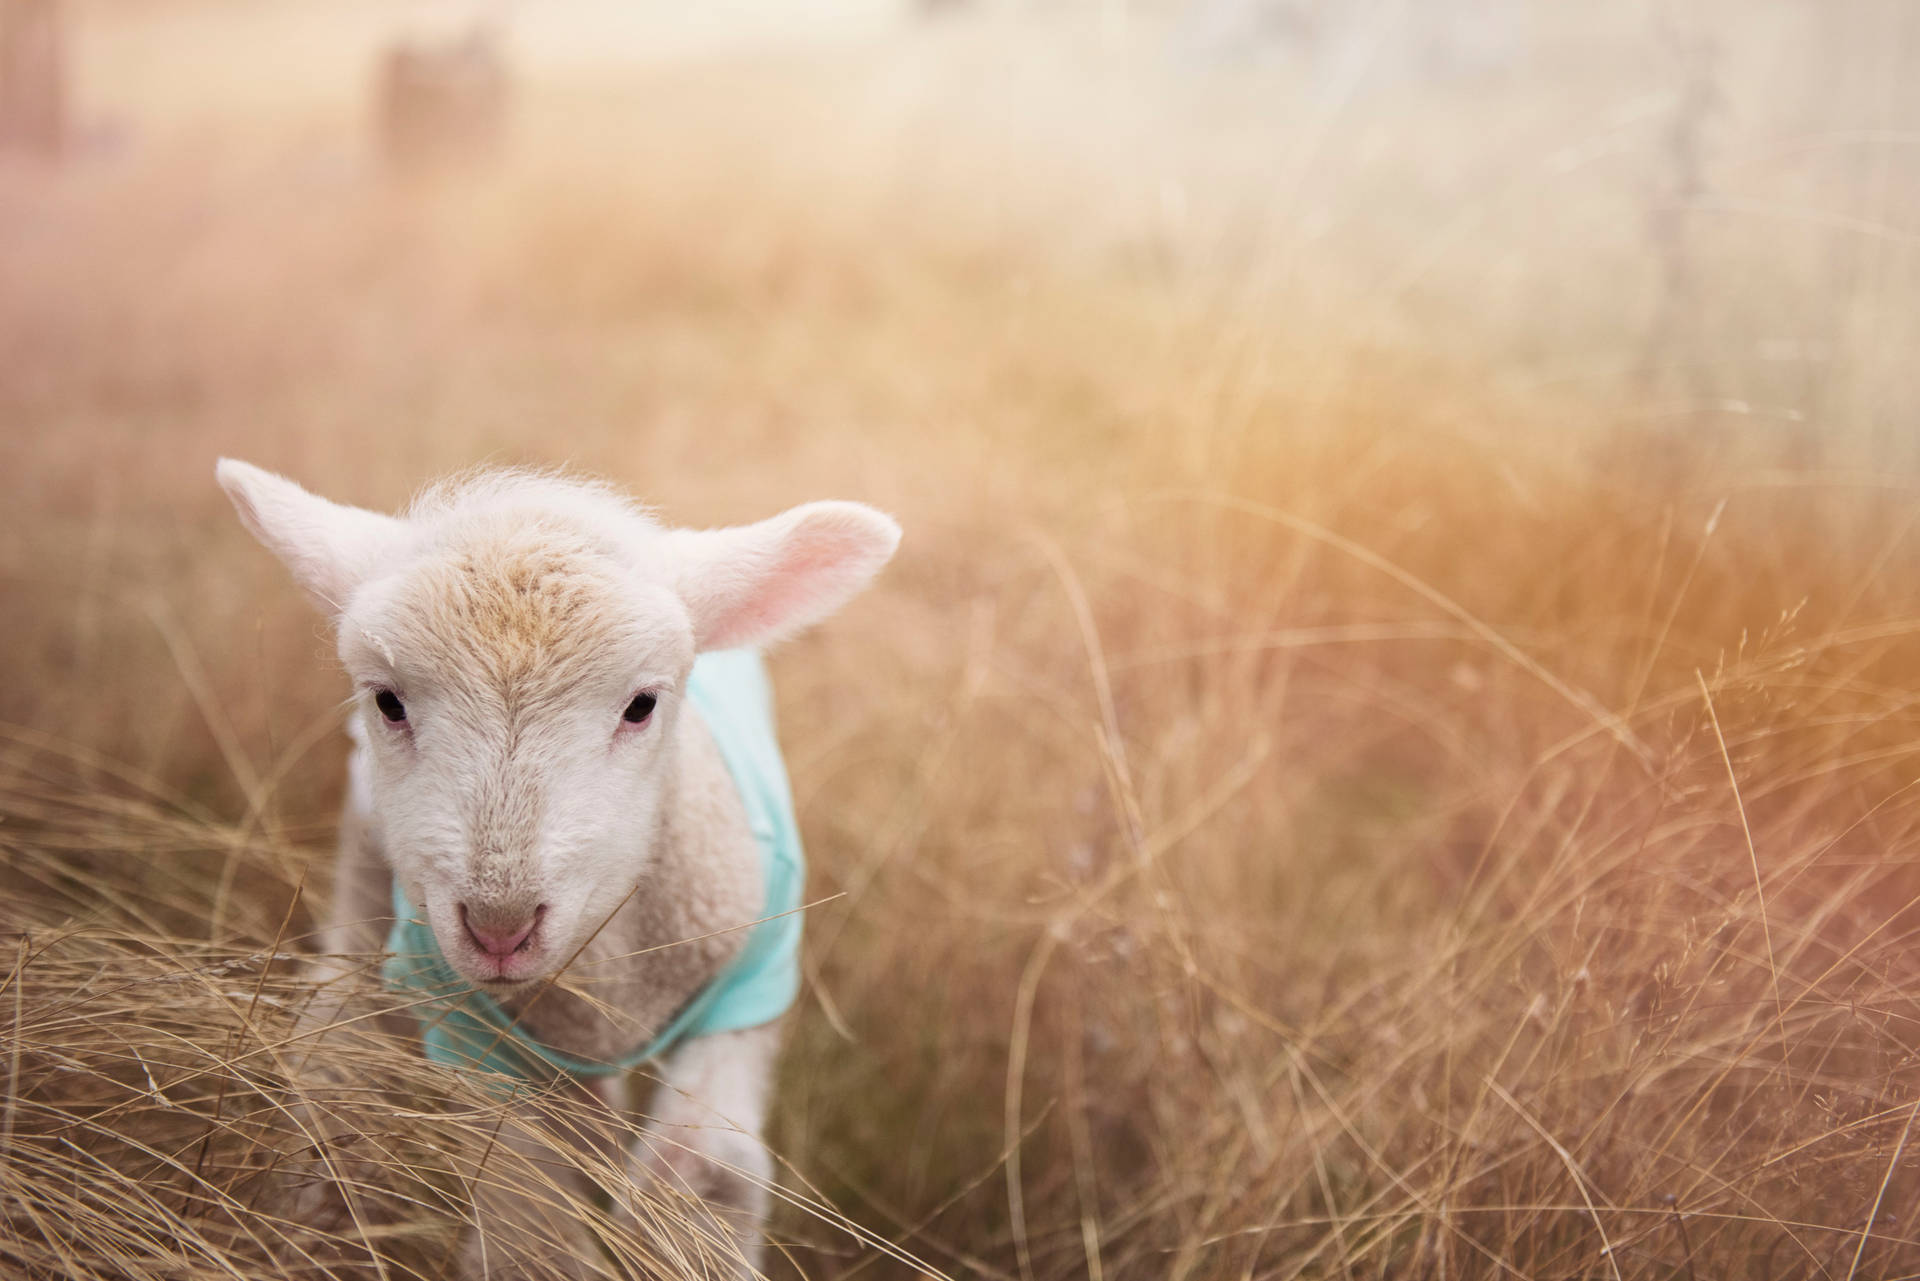 Young Sheep On The Grass Background